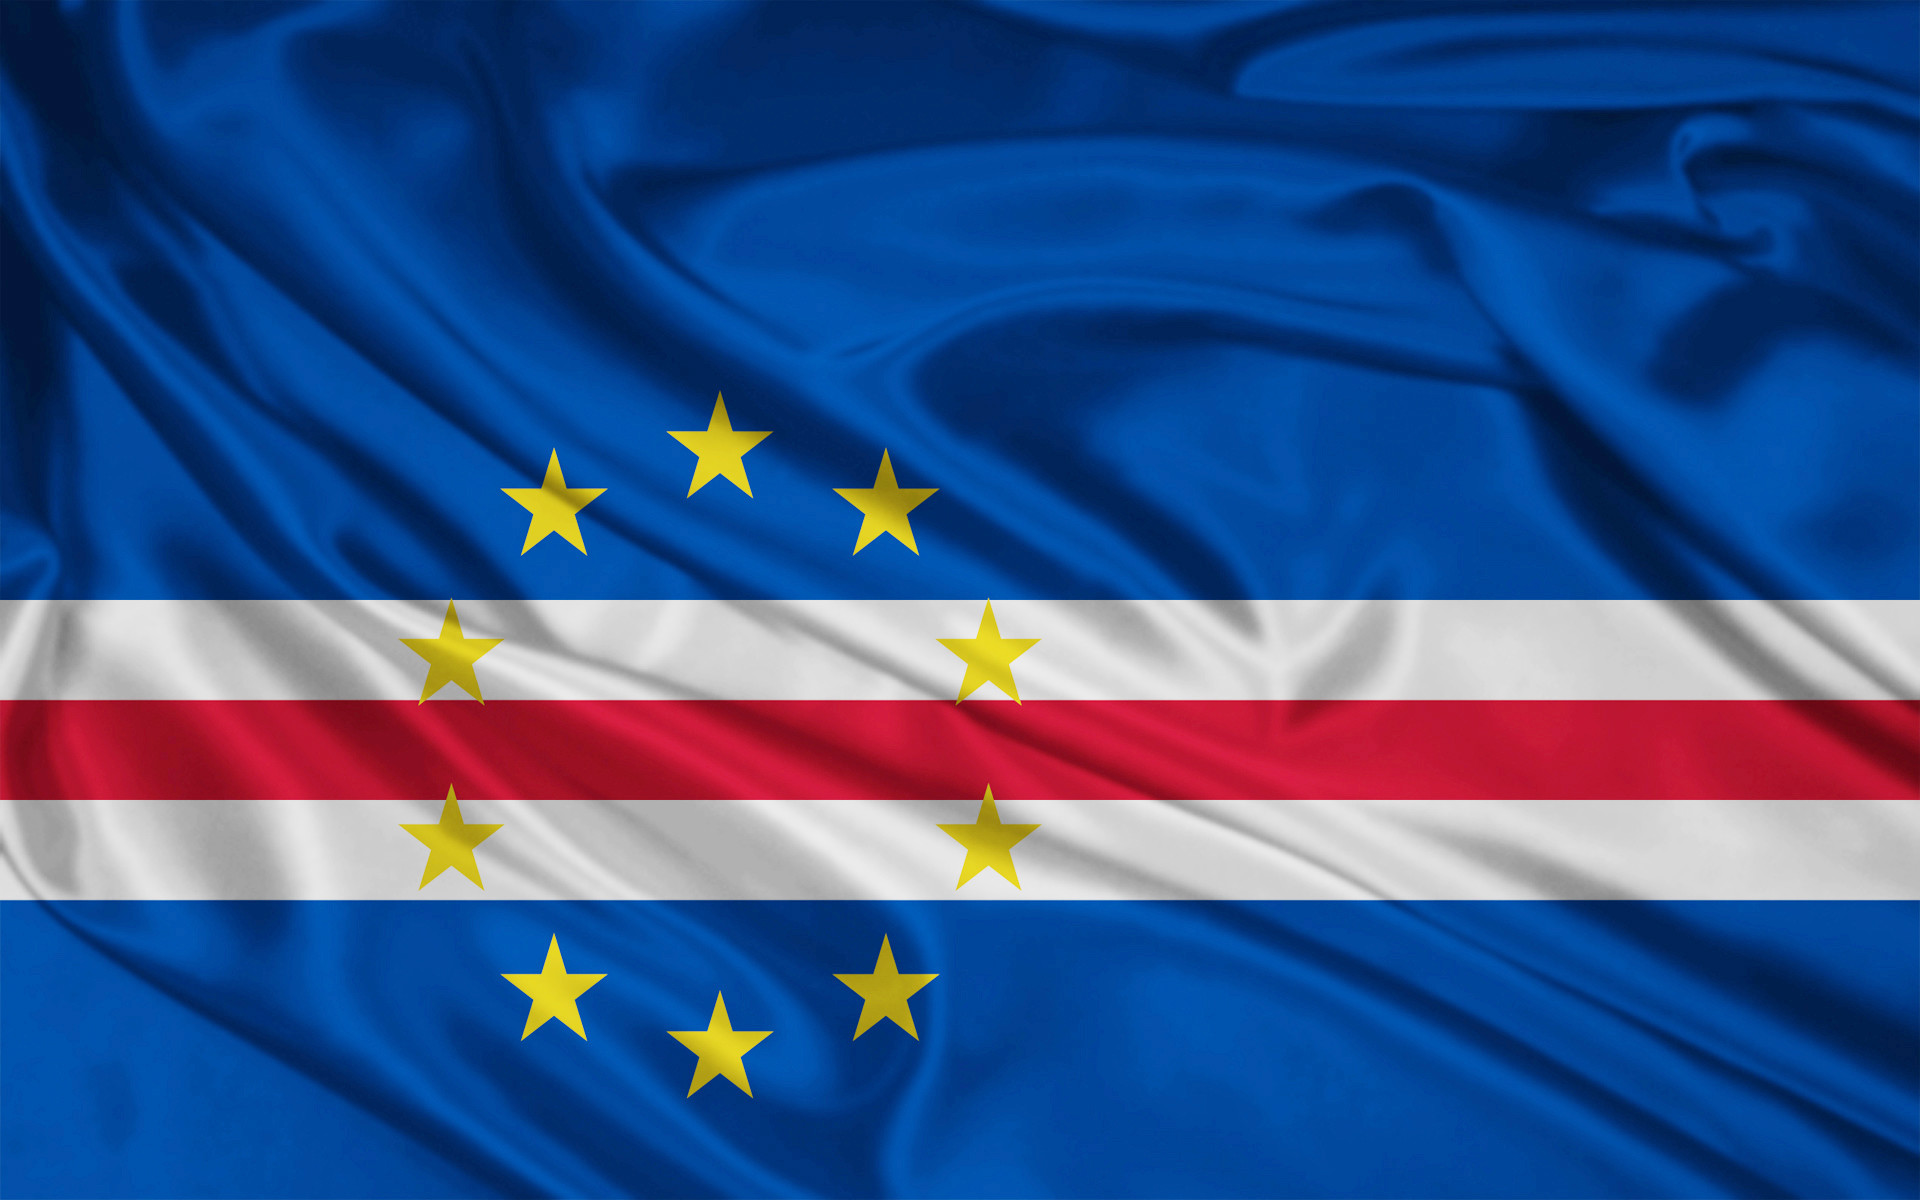 Cape Verde Flag Wallpapers And Stock Photos - Cabo Verde Flag Hd - HD Wallpaper 